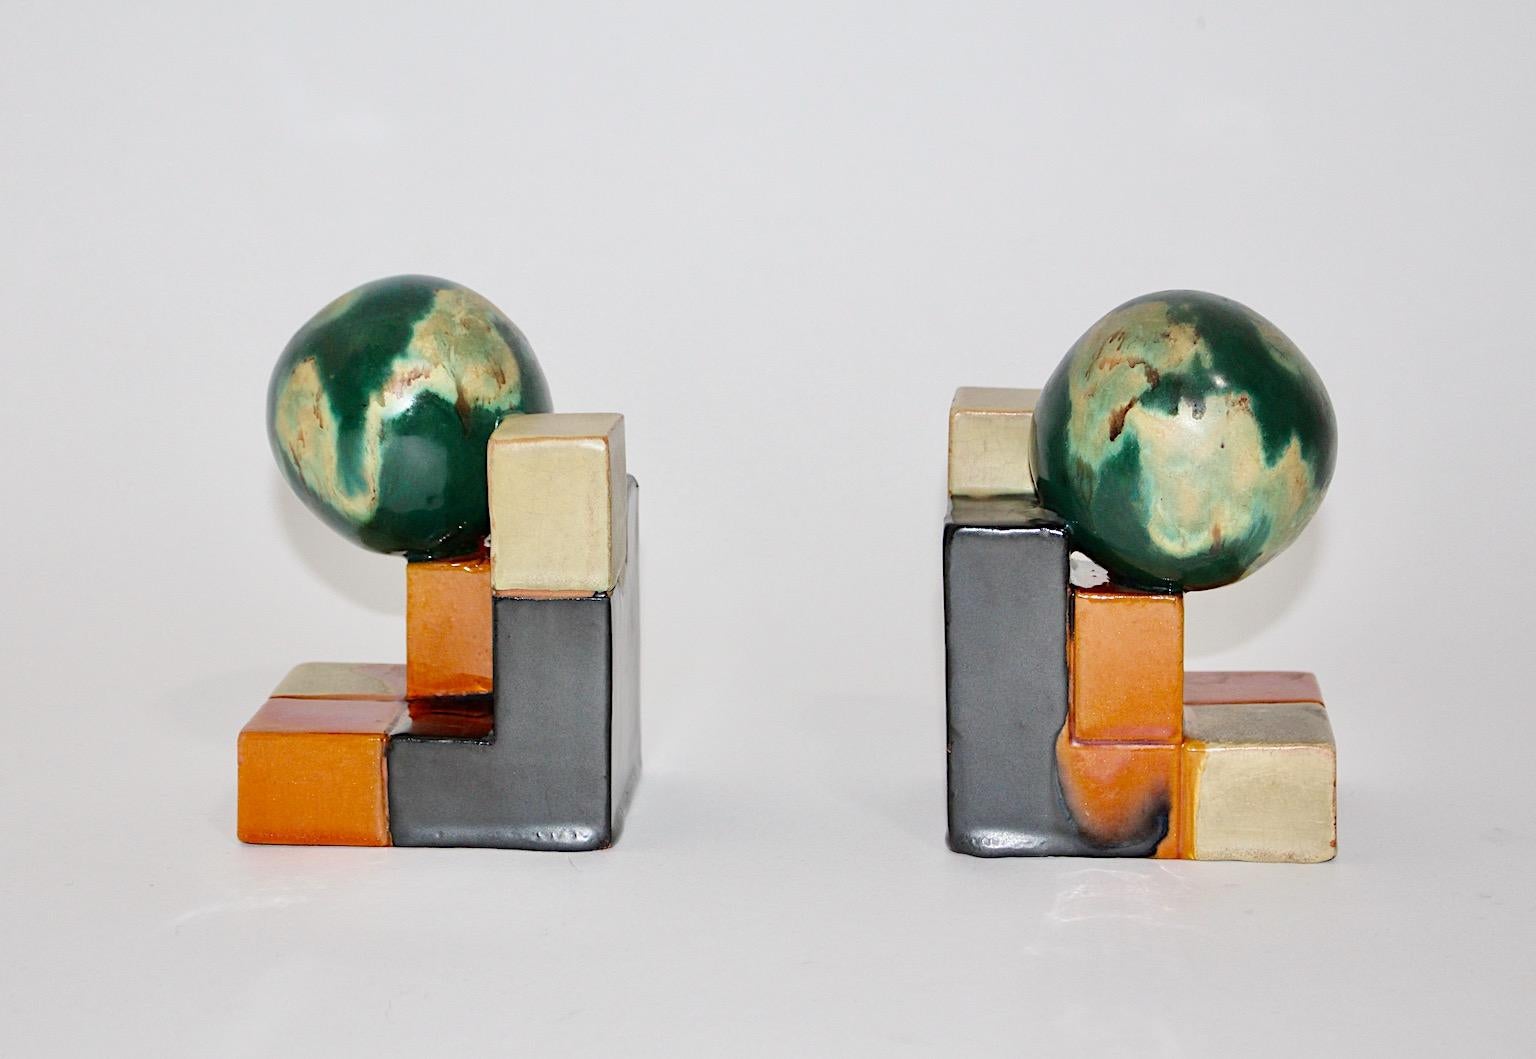 Ceramic Art Deco attributed vintage bookends or book stands, which were designed and manufactured 1920s Germany.
Beautiful multicolored fluted glaze surface in such pretty colors like green, black, orange and ivory and
geometric shape will make the